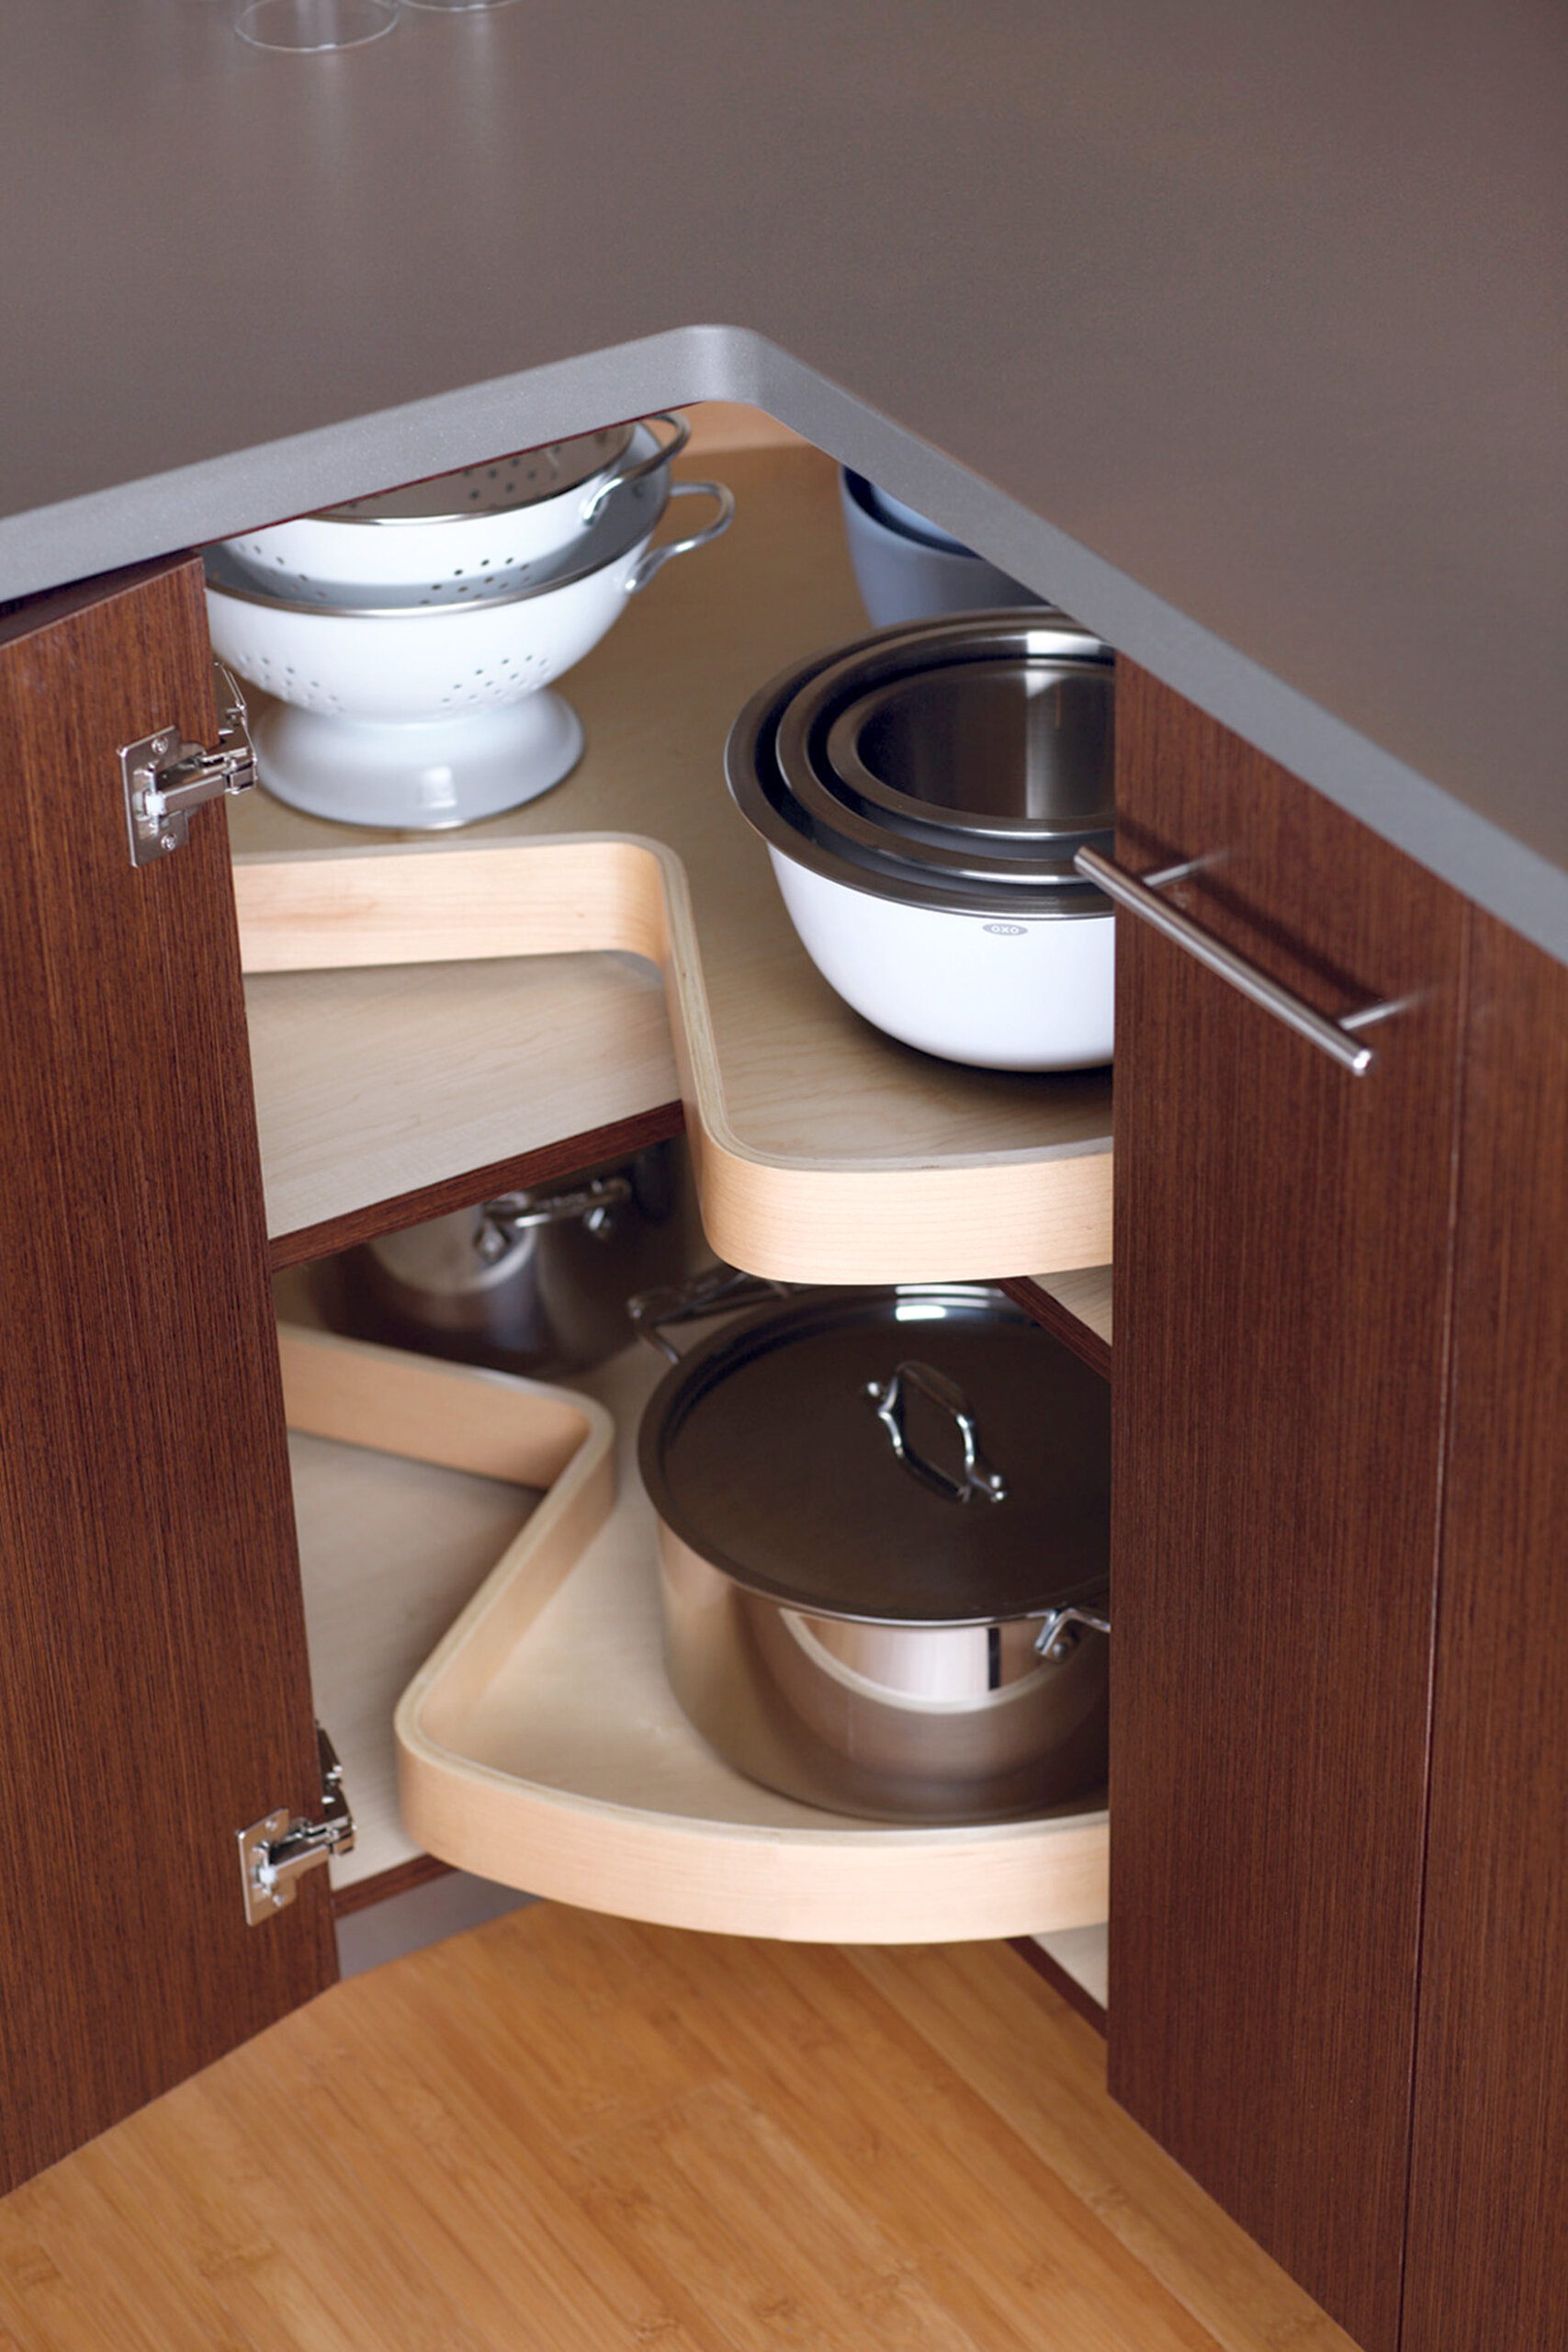 Corner Base Cabinets That Maximize Your Kitchen Storage Space - Dura ...